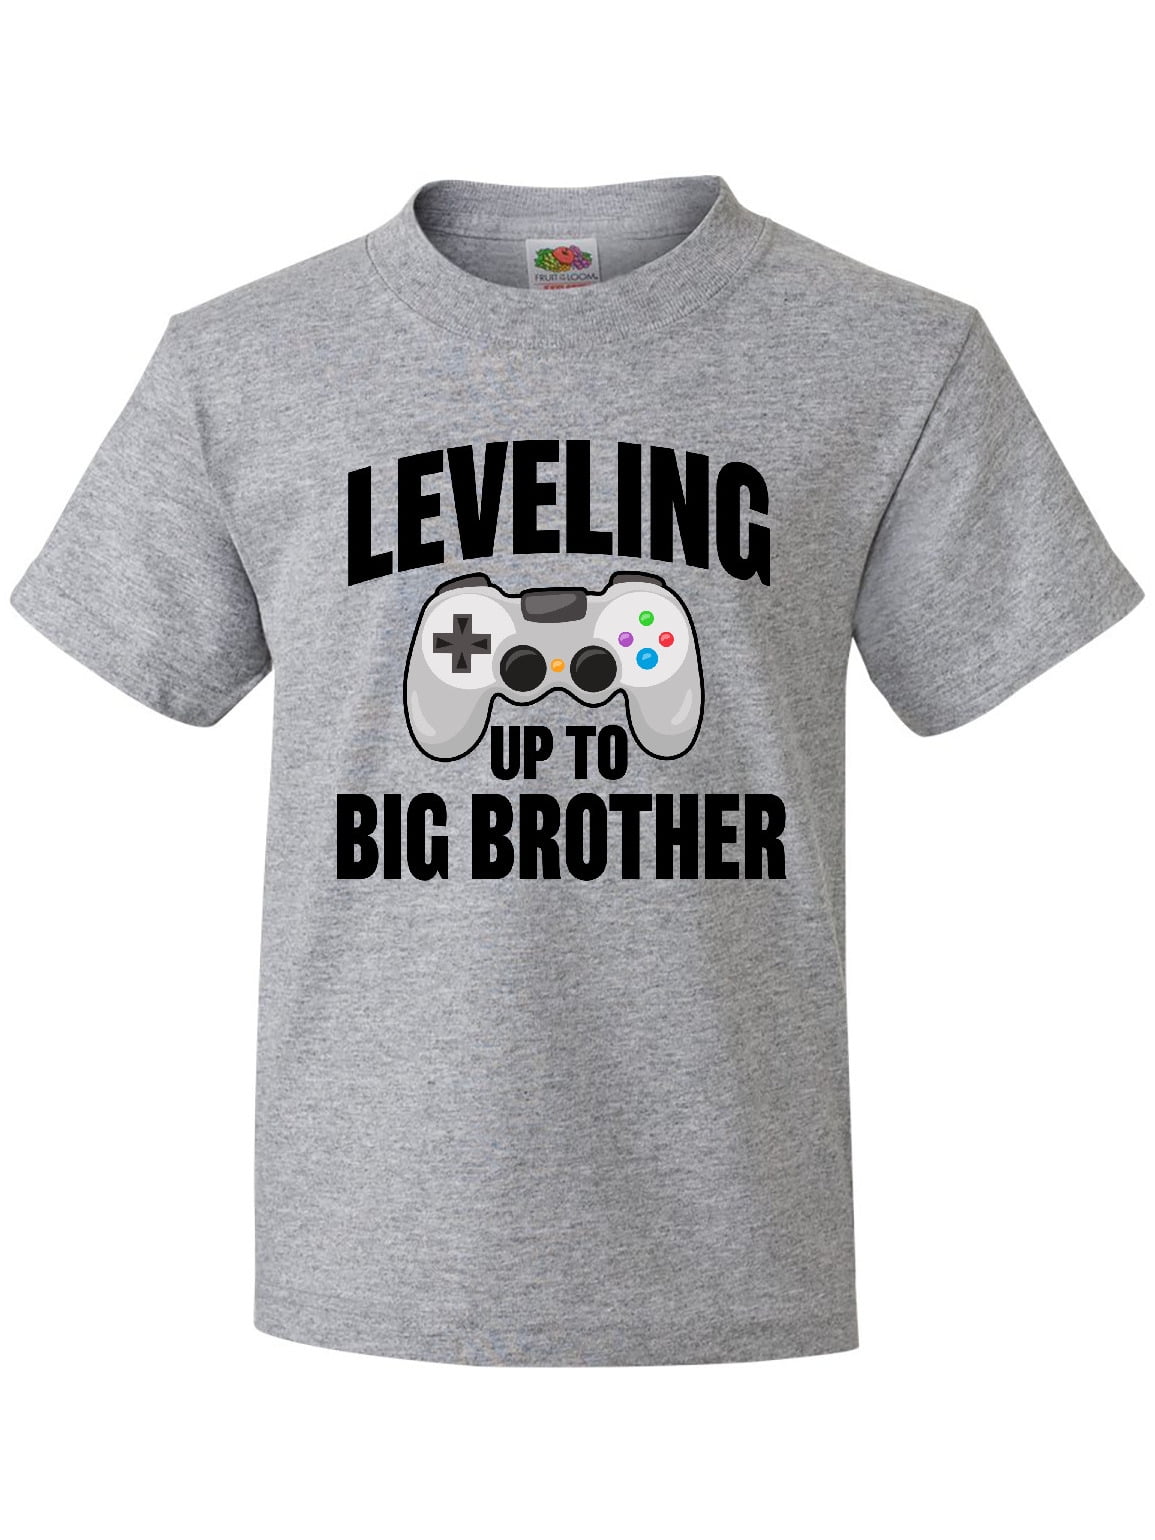 Inktastic Leveling Up to Big Brother Youth T-Shirt - Walmart.com